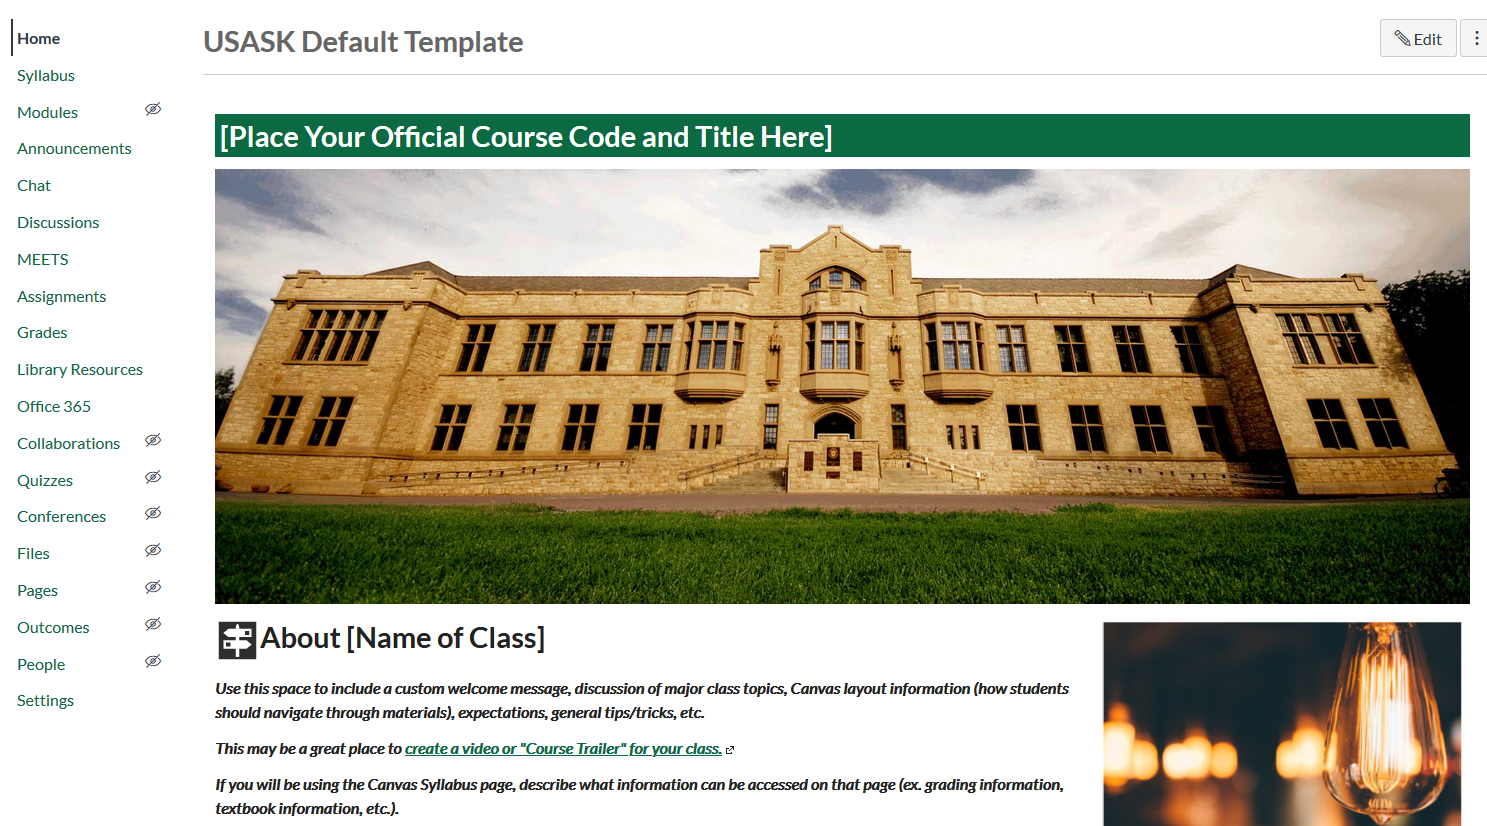 Image of the USask Canvas template